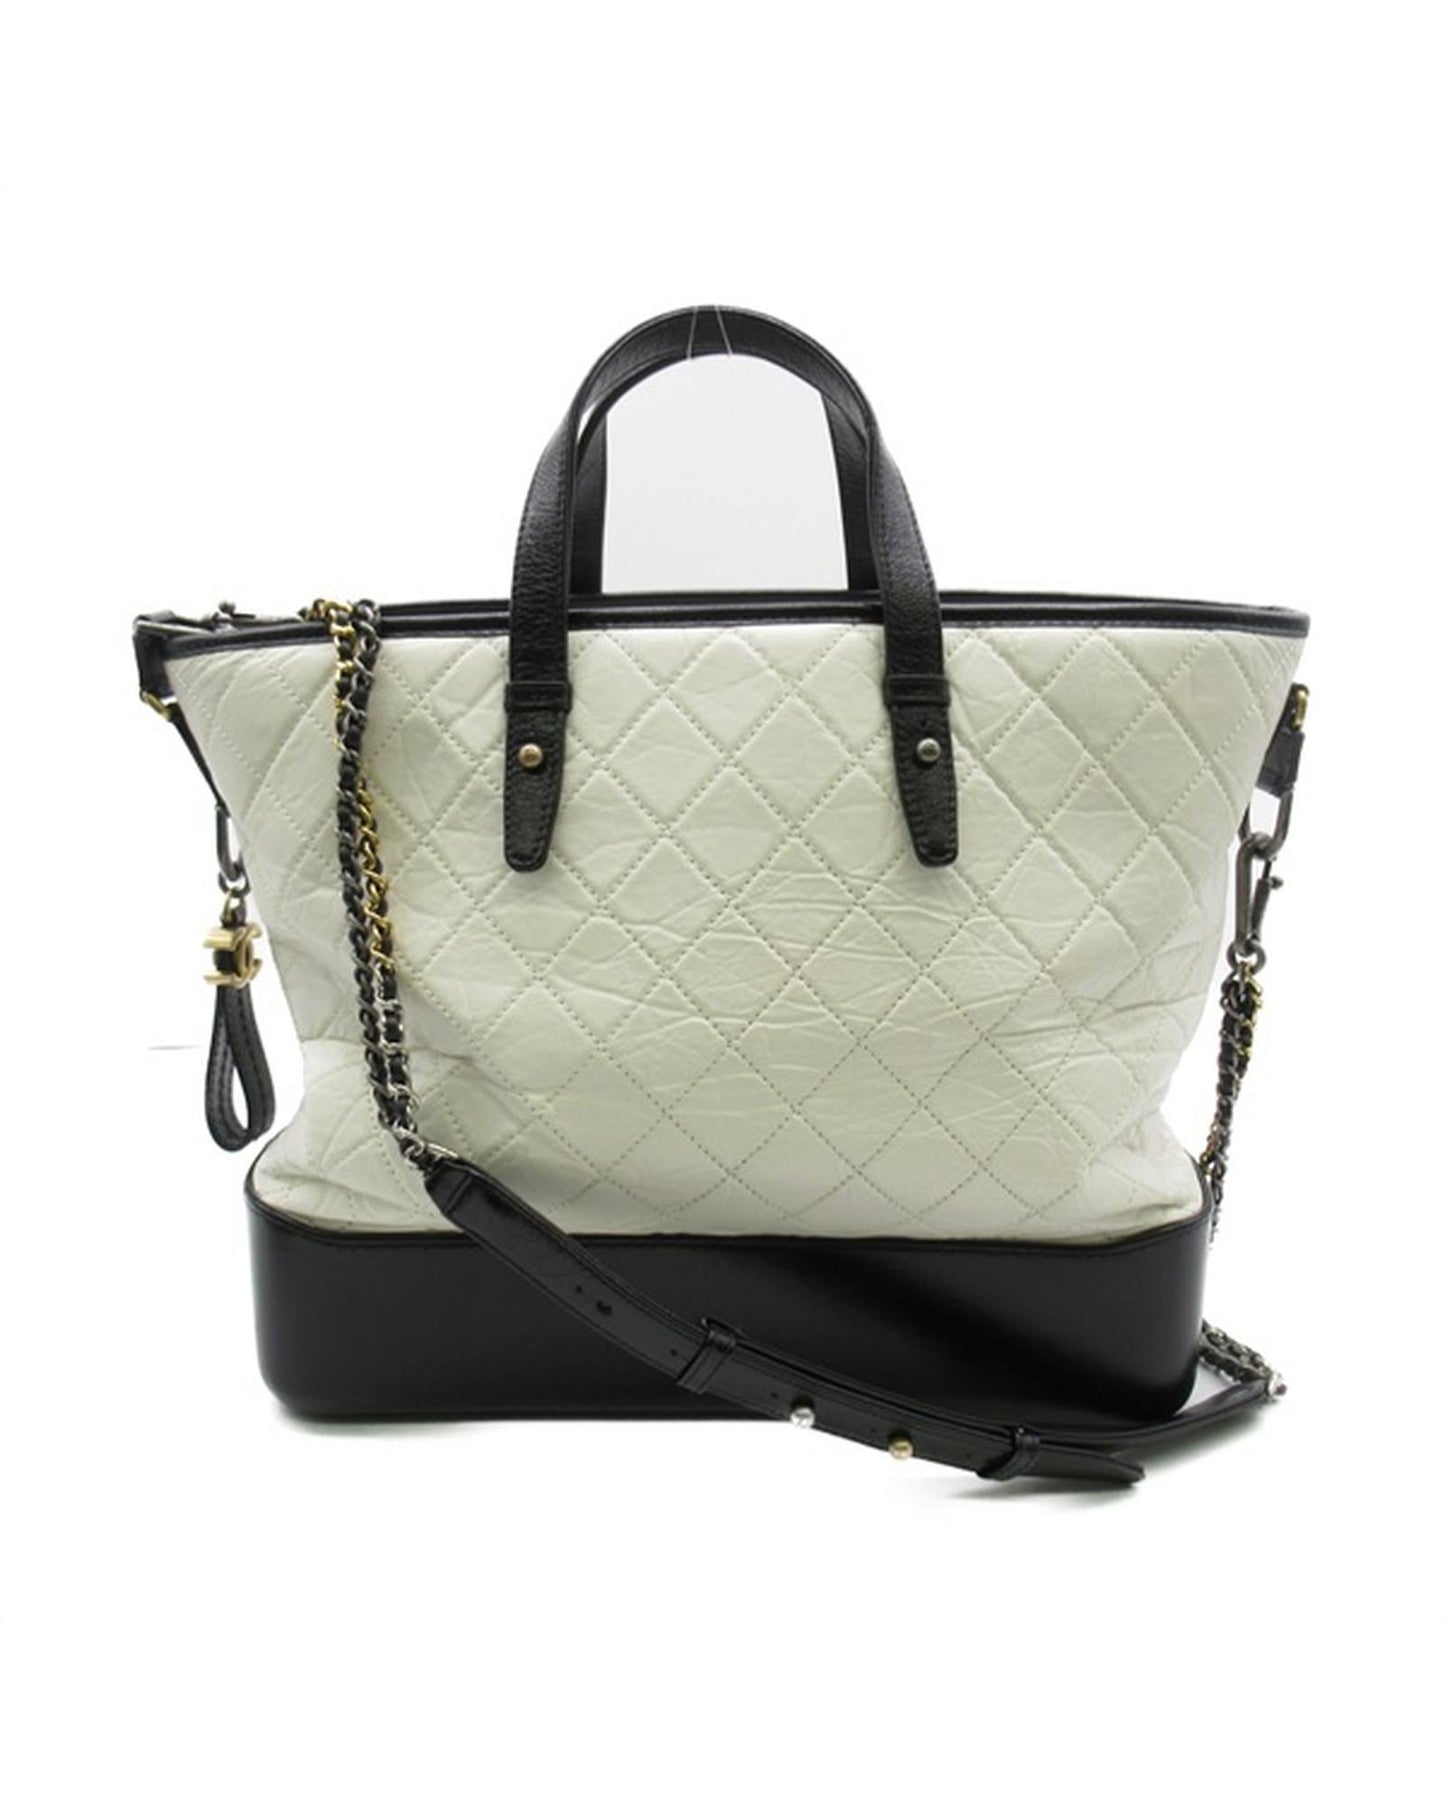 Chanel Women's Chic White Shopping Tote by Gabrielle in White